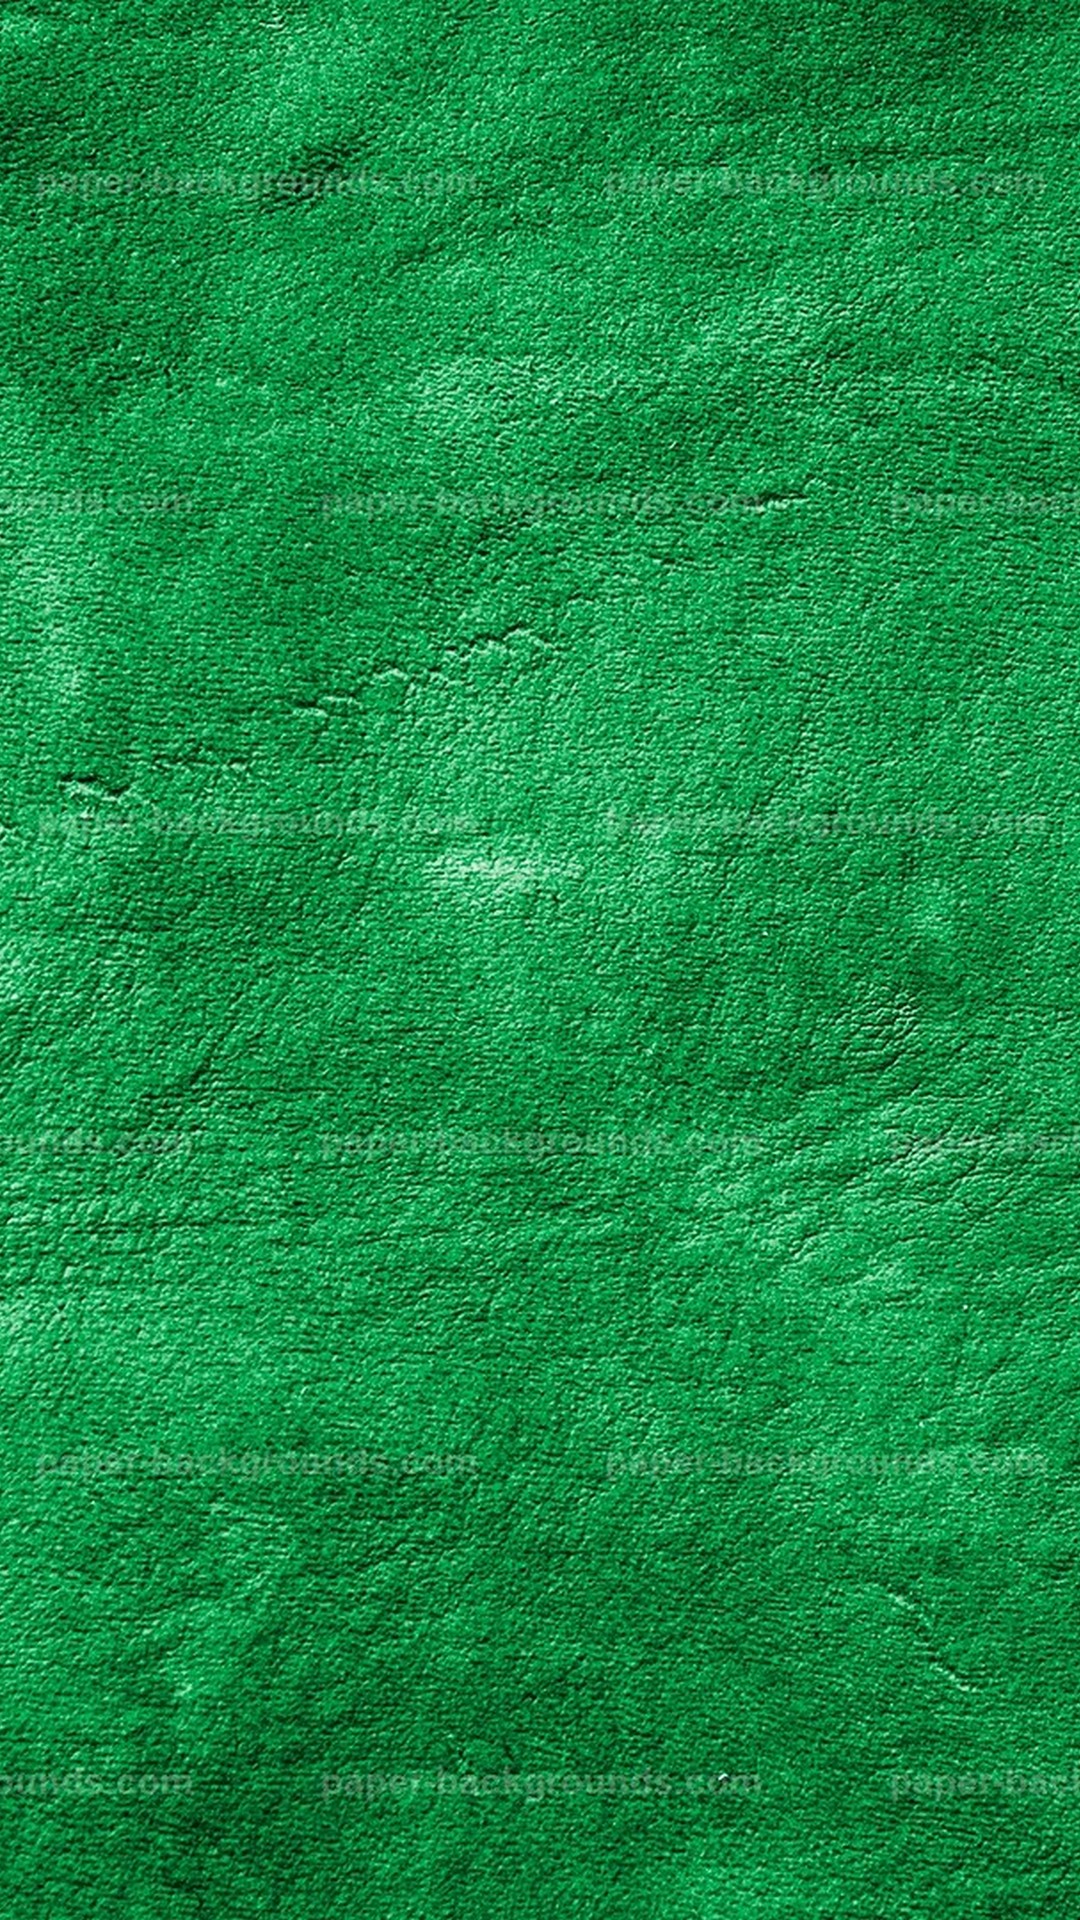 Android Wallpaper Hd Emerald Green 2020 Android Wallpapers